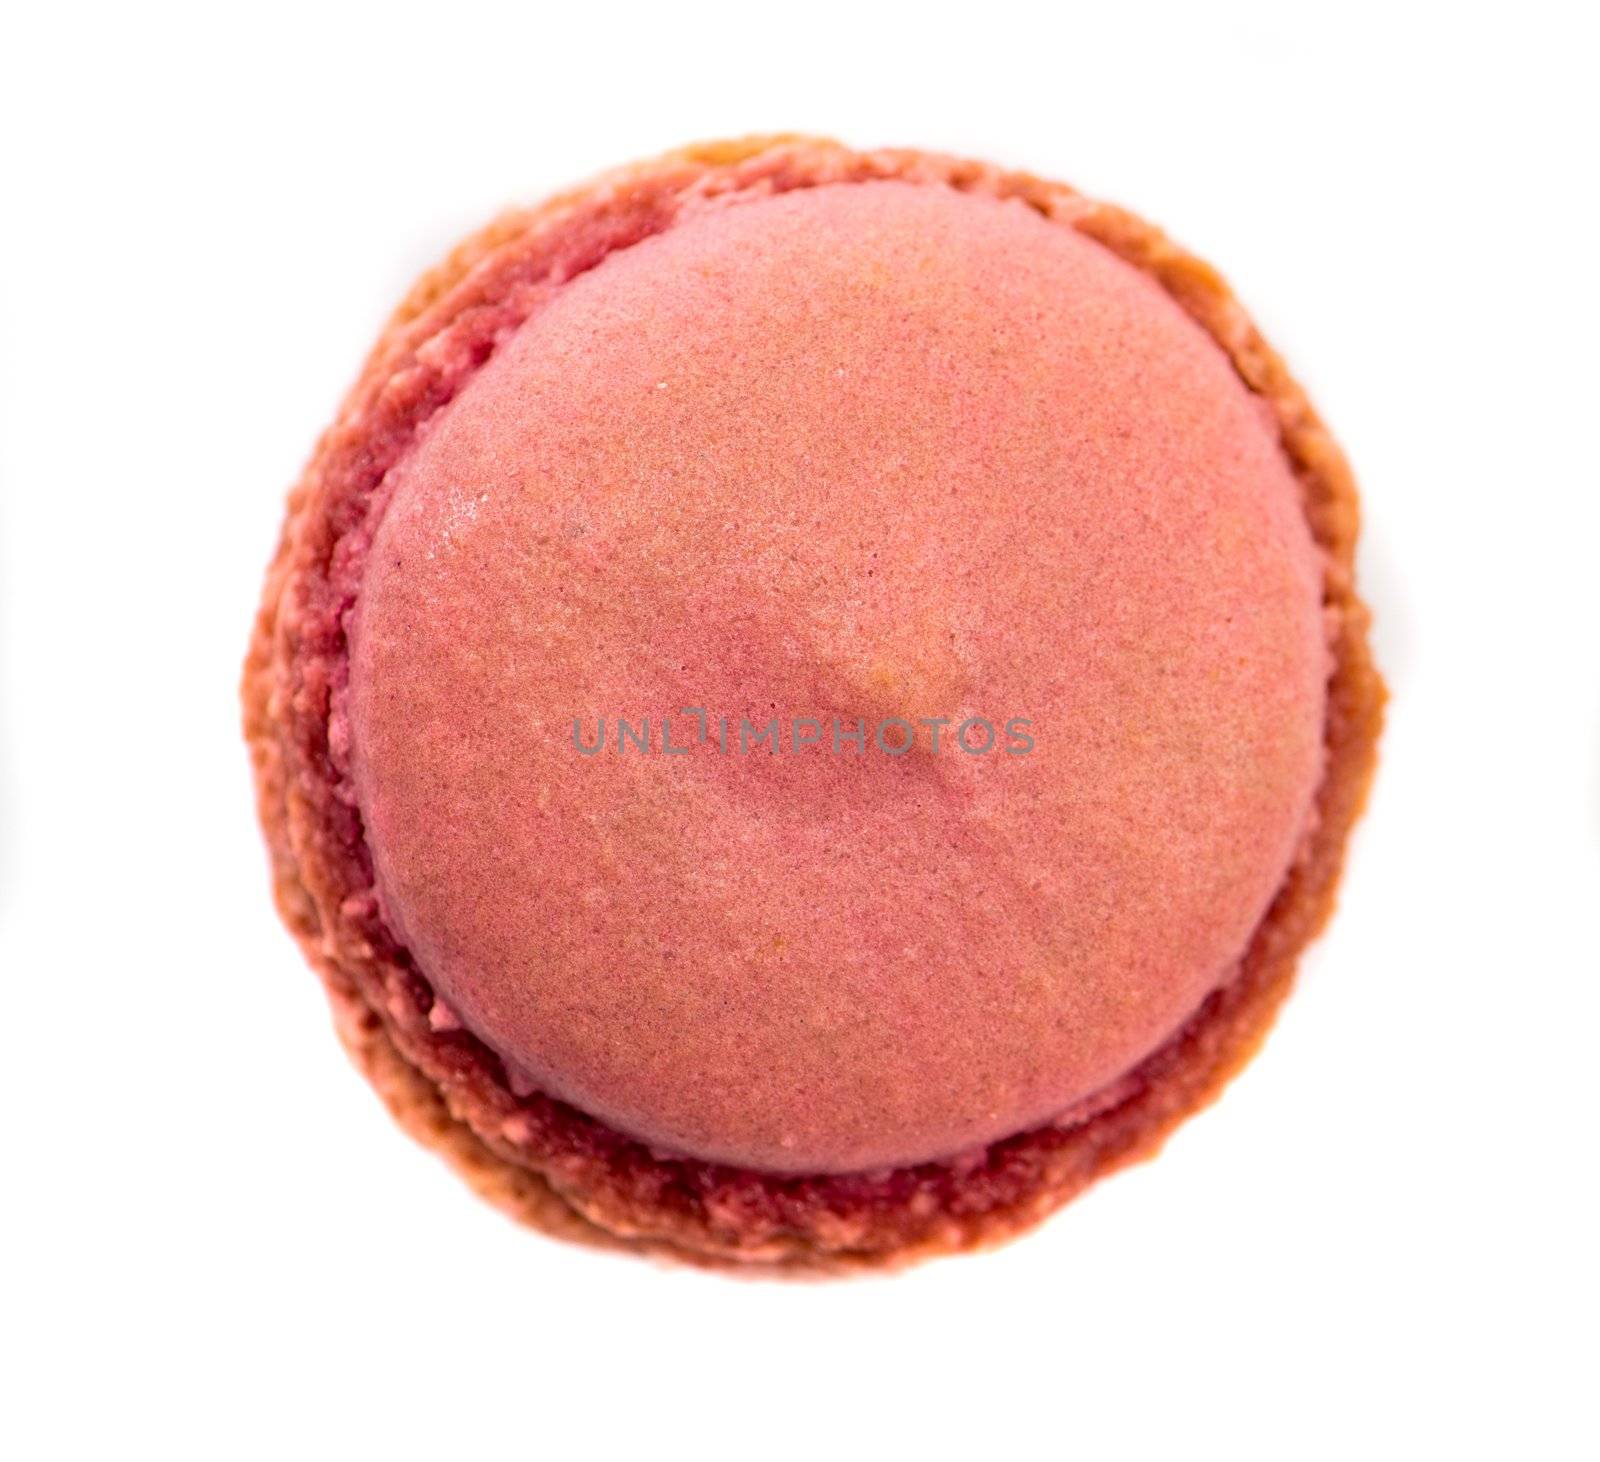 pink cookies macaroon isolated on a white background